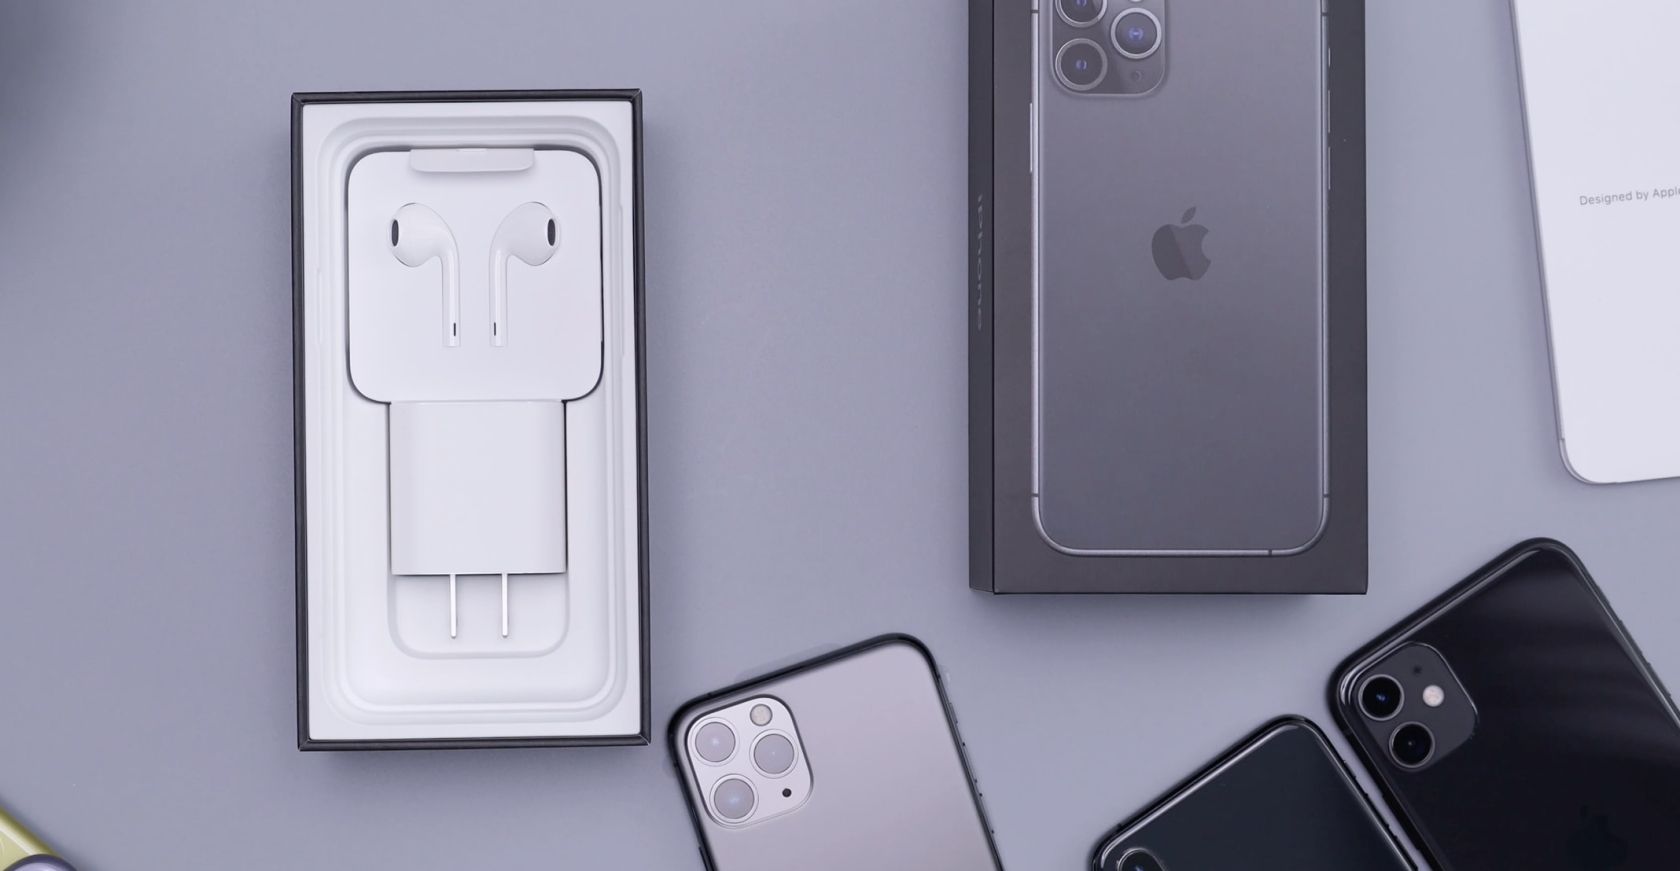 Power adapter with iPhone 11 Pro